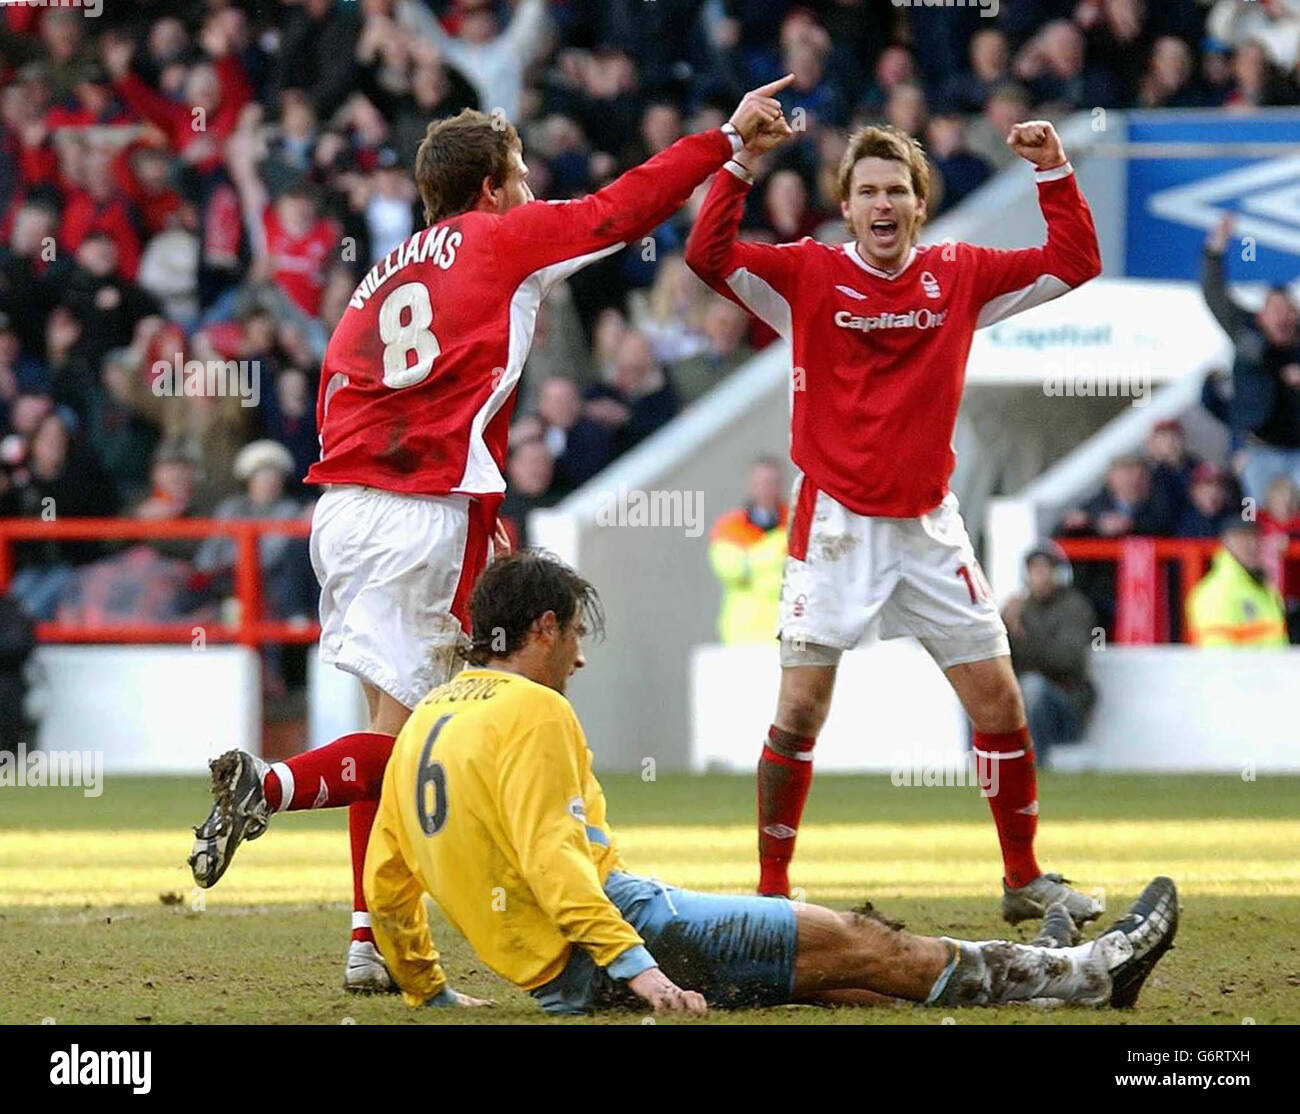 Nottingham Forest Gareth Williams celebrates scoring his second goal against Crystal Palace with team mate Gareth Taylor during the Nationwide Division One match at the City Ground, Nottingham. NO UNOFFICIAL CLUB WEBSITE USE. Stock Photo